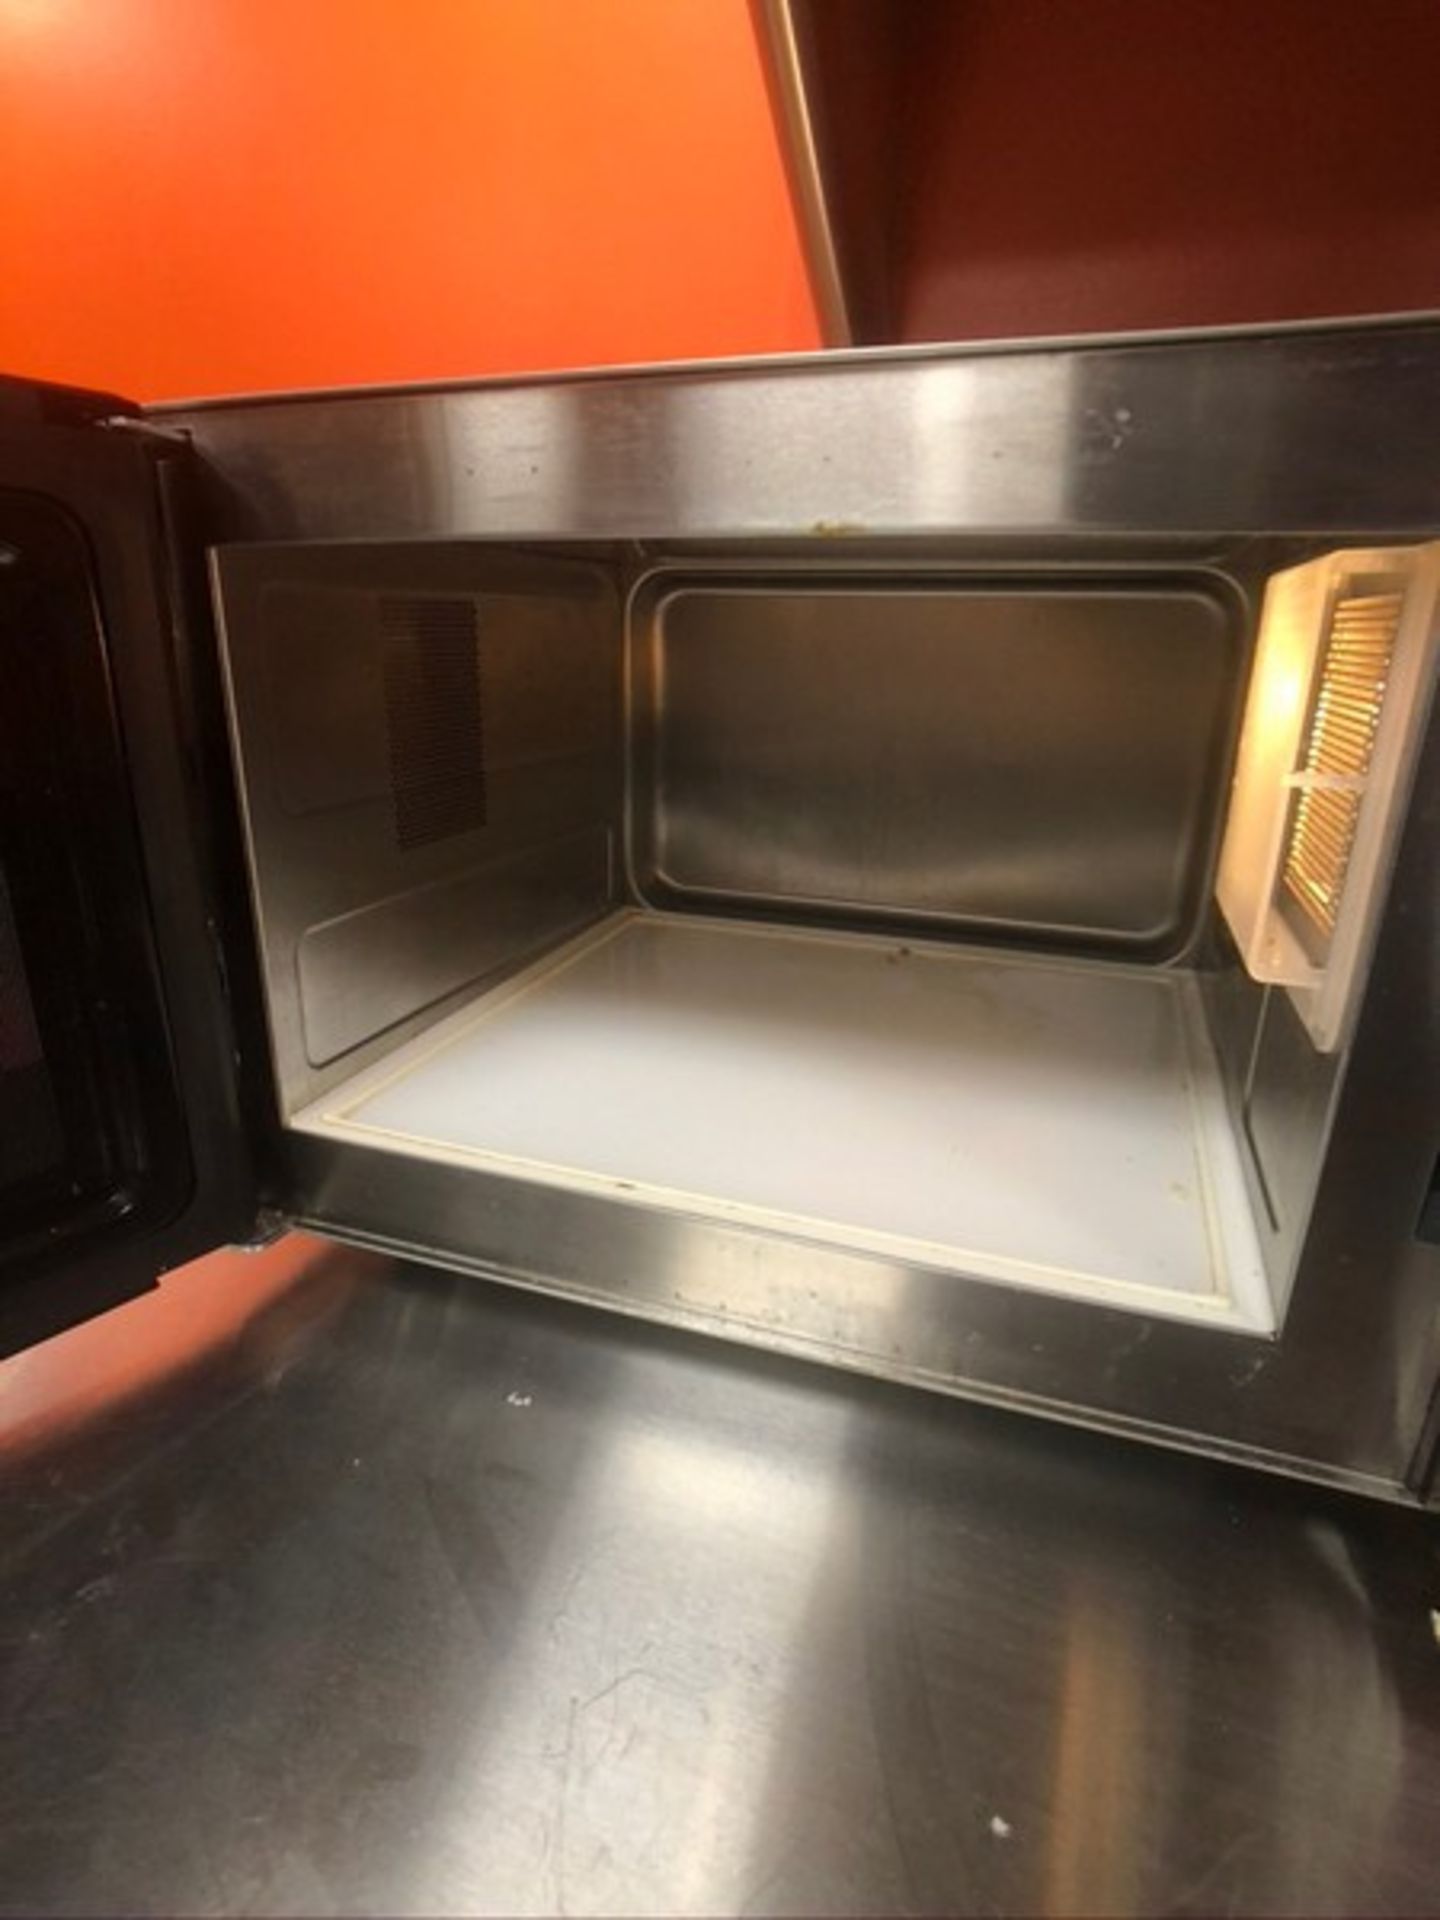 2016 PANASONIC MICROWAVE, MODEL NE - 1064F T, S/N 6H66150172 (INV#74564)(LOCATED AT MDG AUCTION - Image 3 of 3